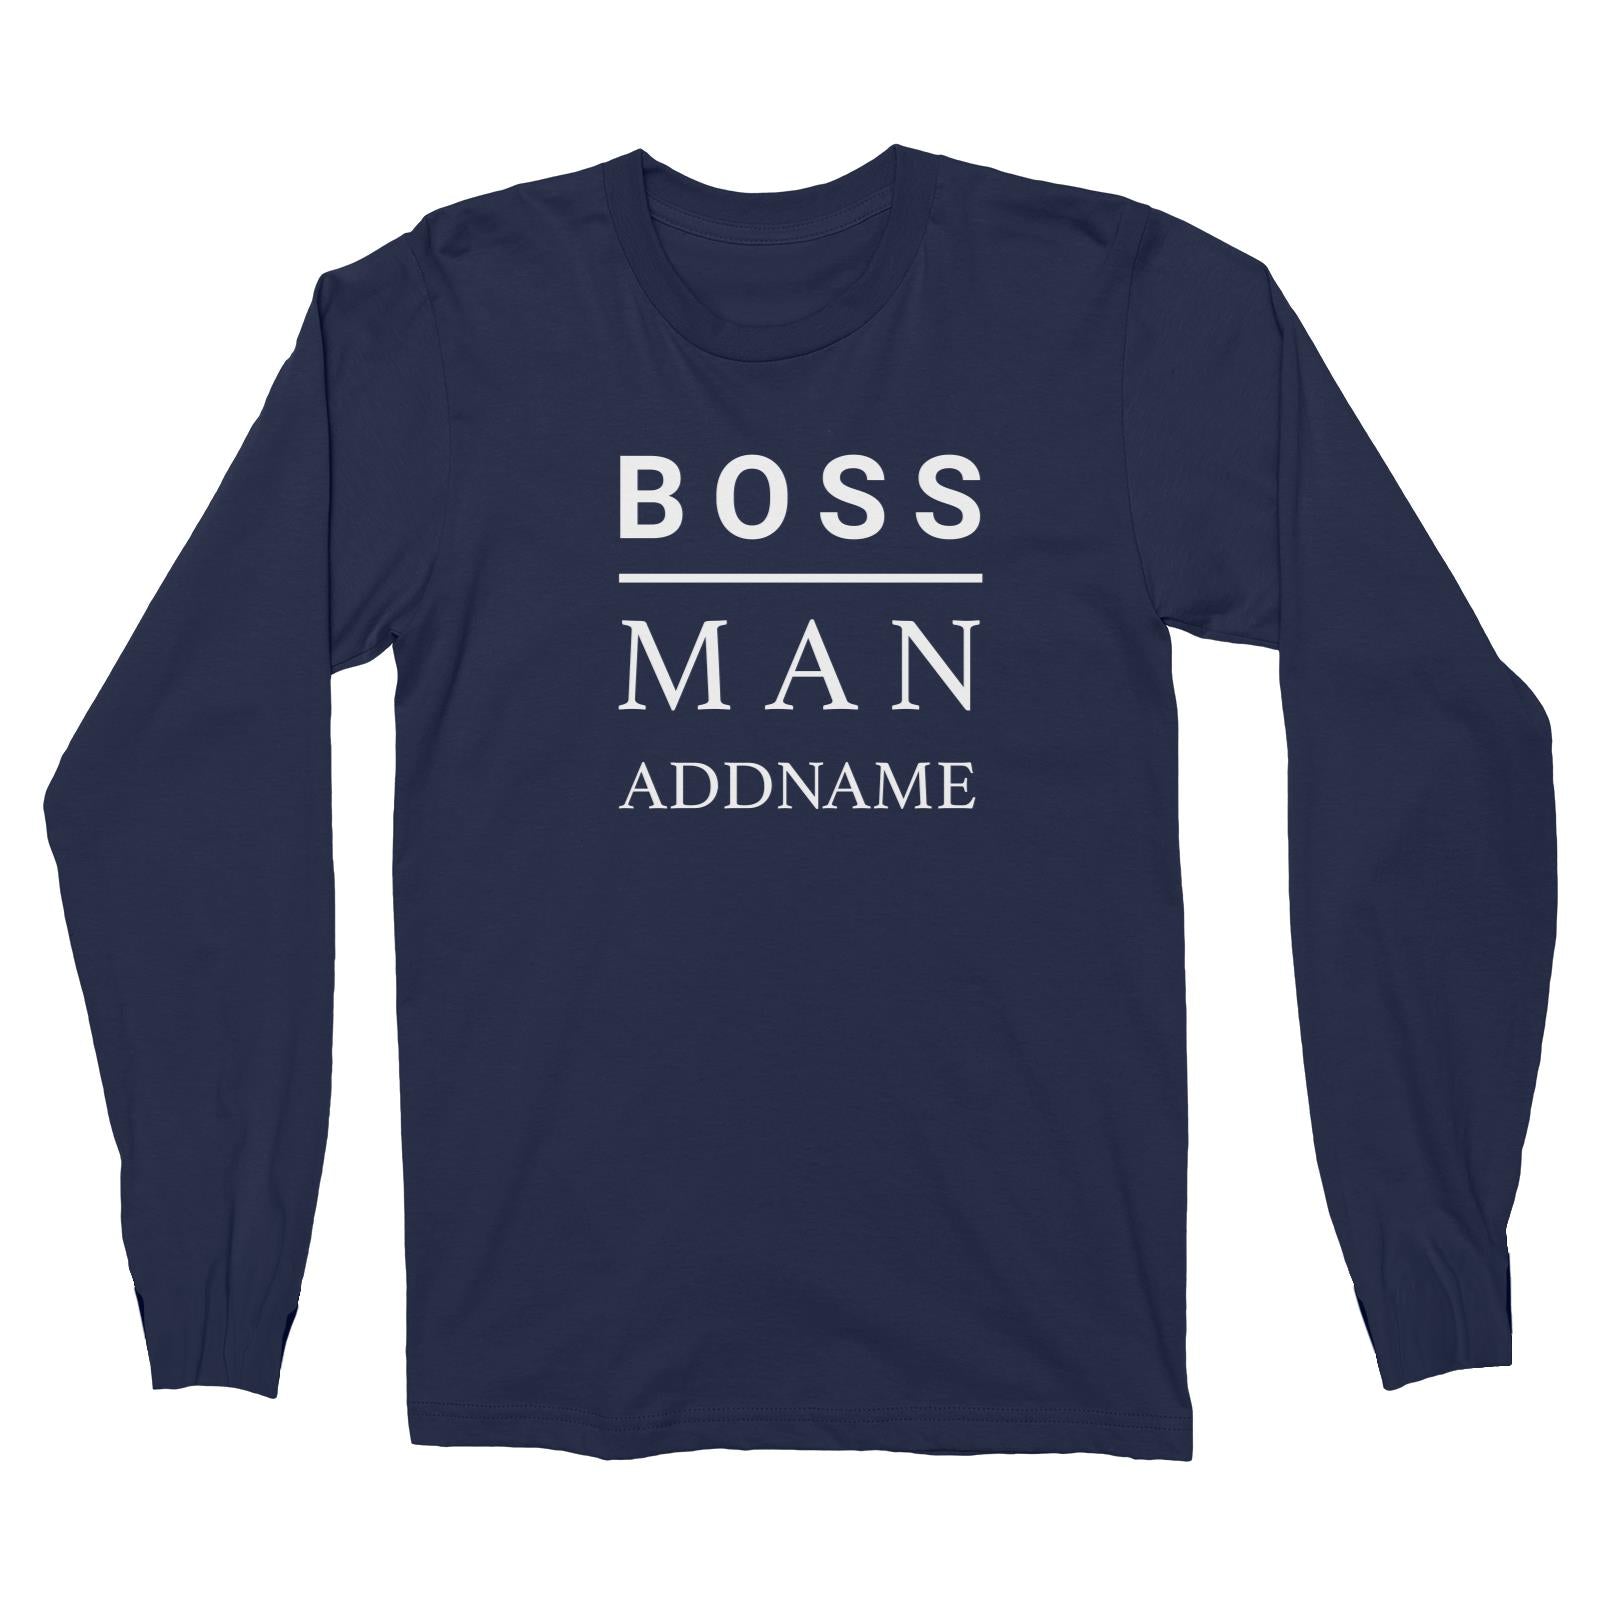 Boss Man Addname Long Sleeve Unisex T-Shirt  Matching Family Personalizable Designs